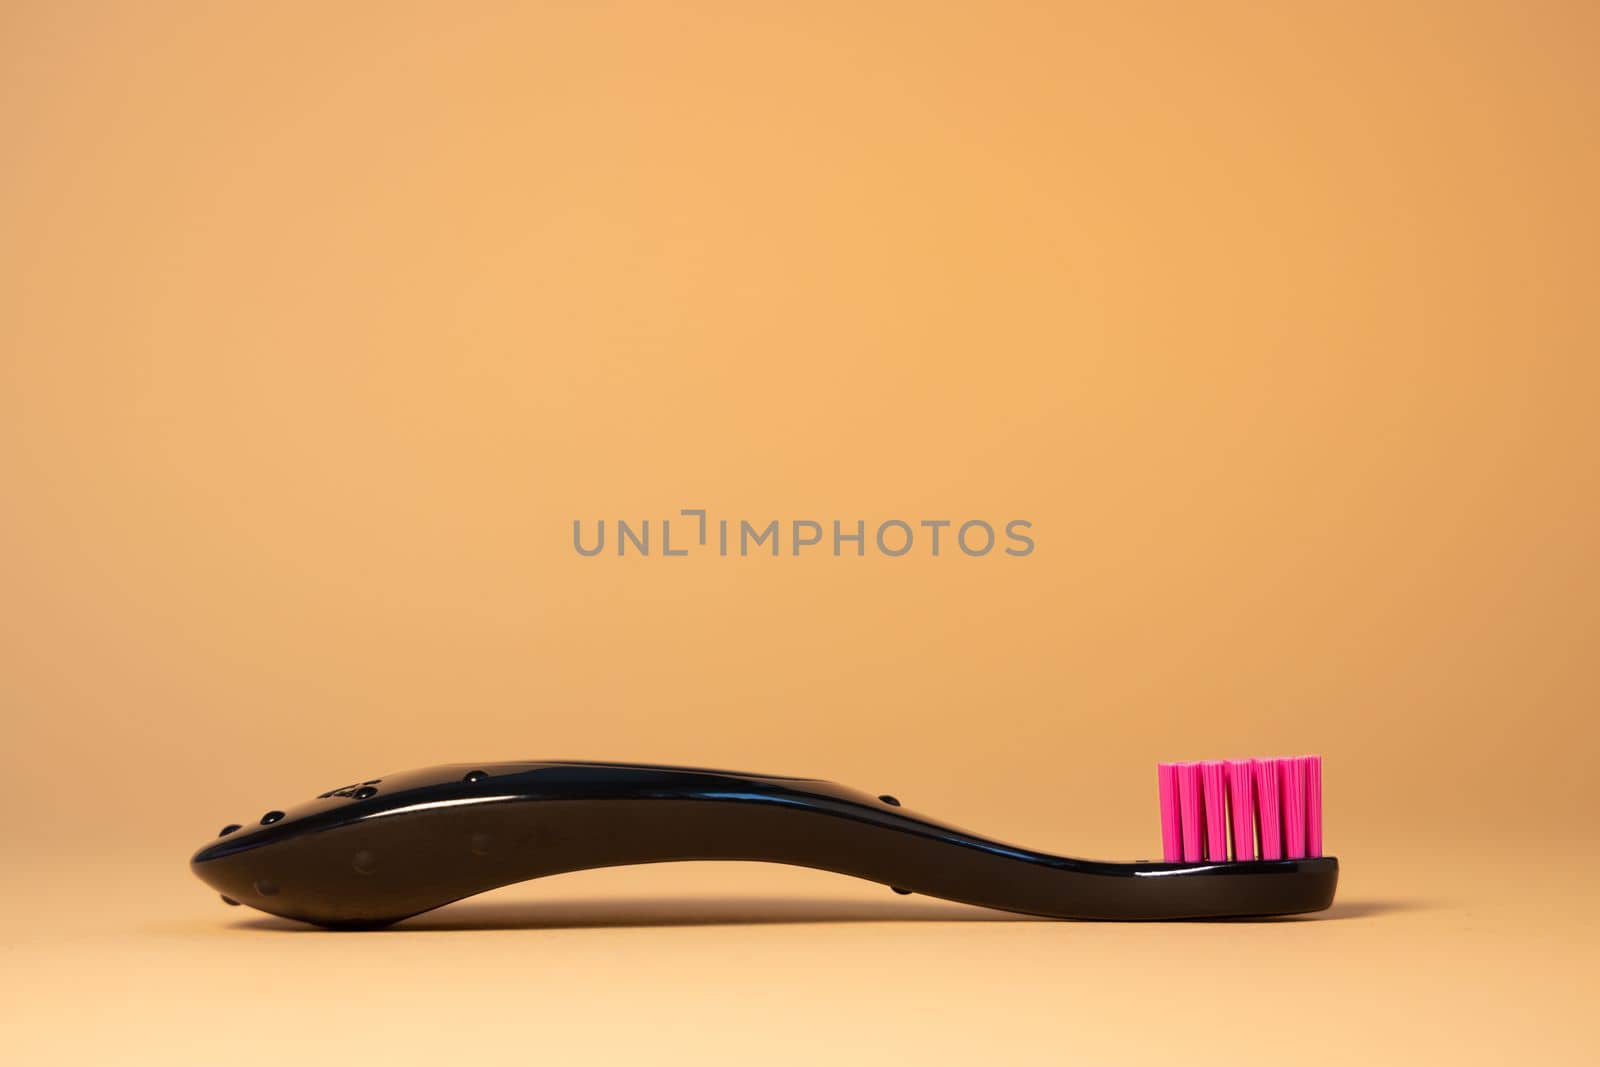 Neon pink plastic baby tooth brush on natural background. Dental and healthcare concept